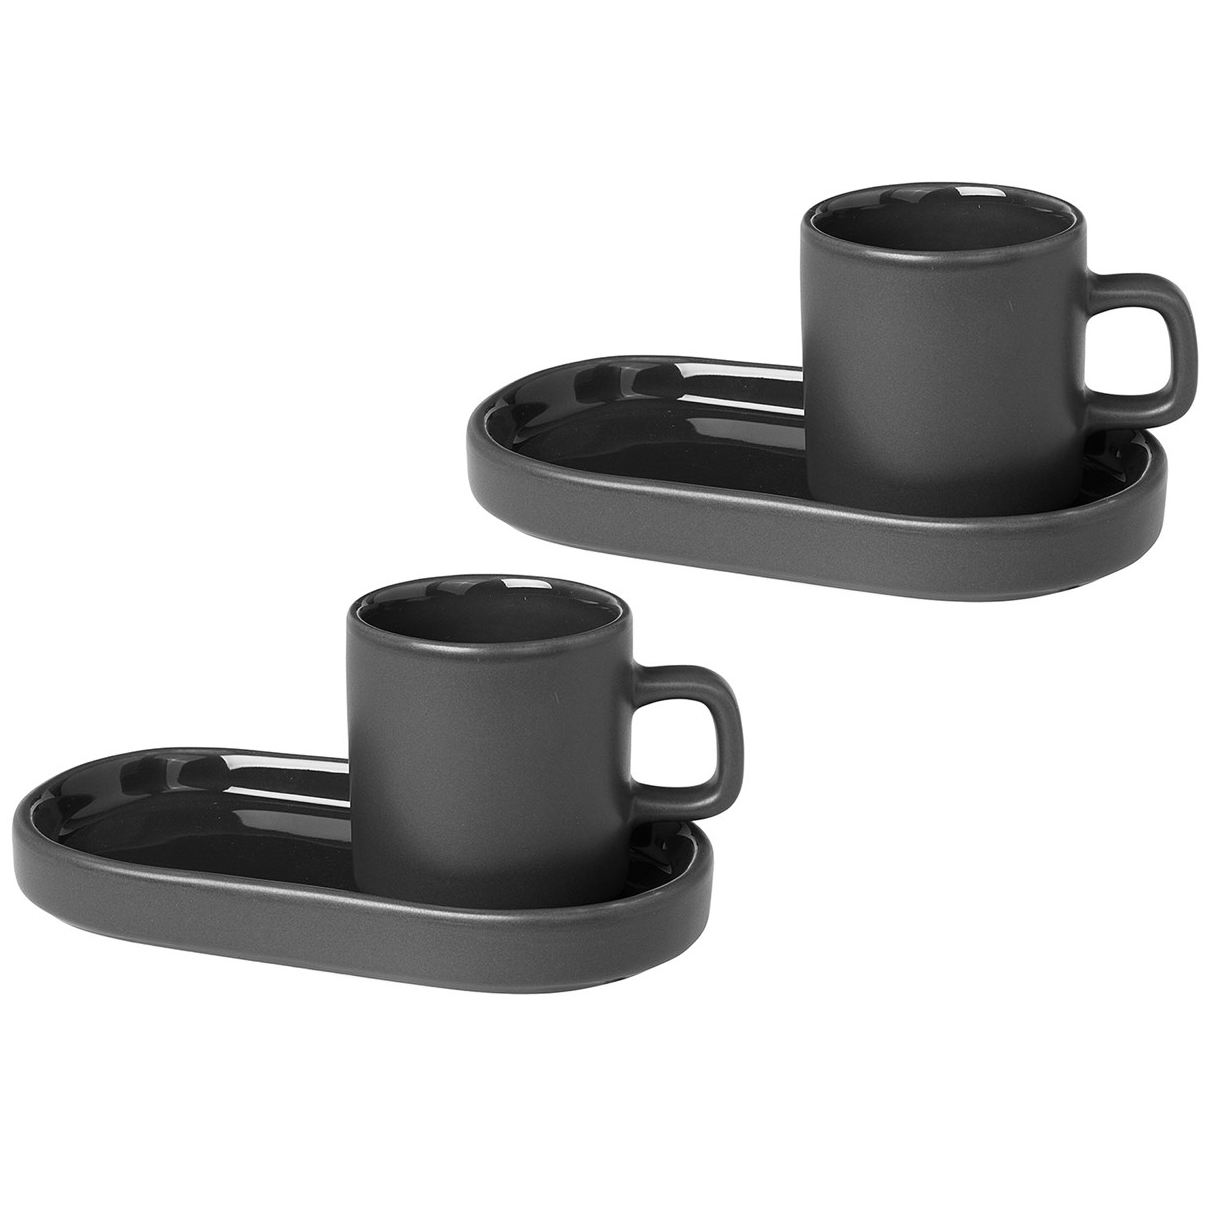 https://www.nordicnest.com/assets/blobs/blomus-pilar-espresso-cup-with-saucer-2-pack-agave-green/37419-02-01-cb81ed1893.jpg